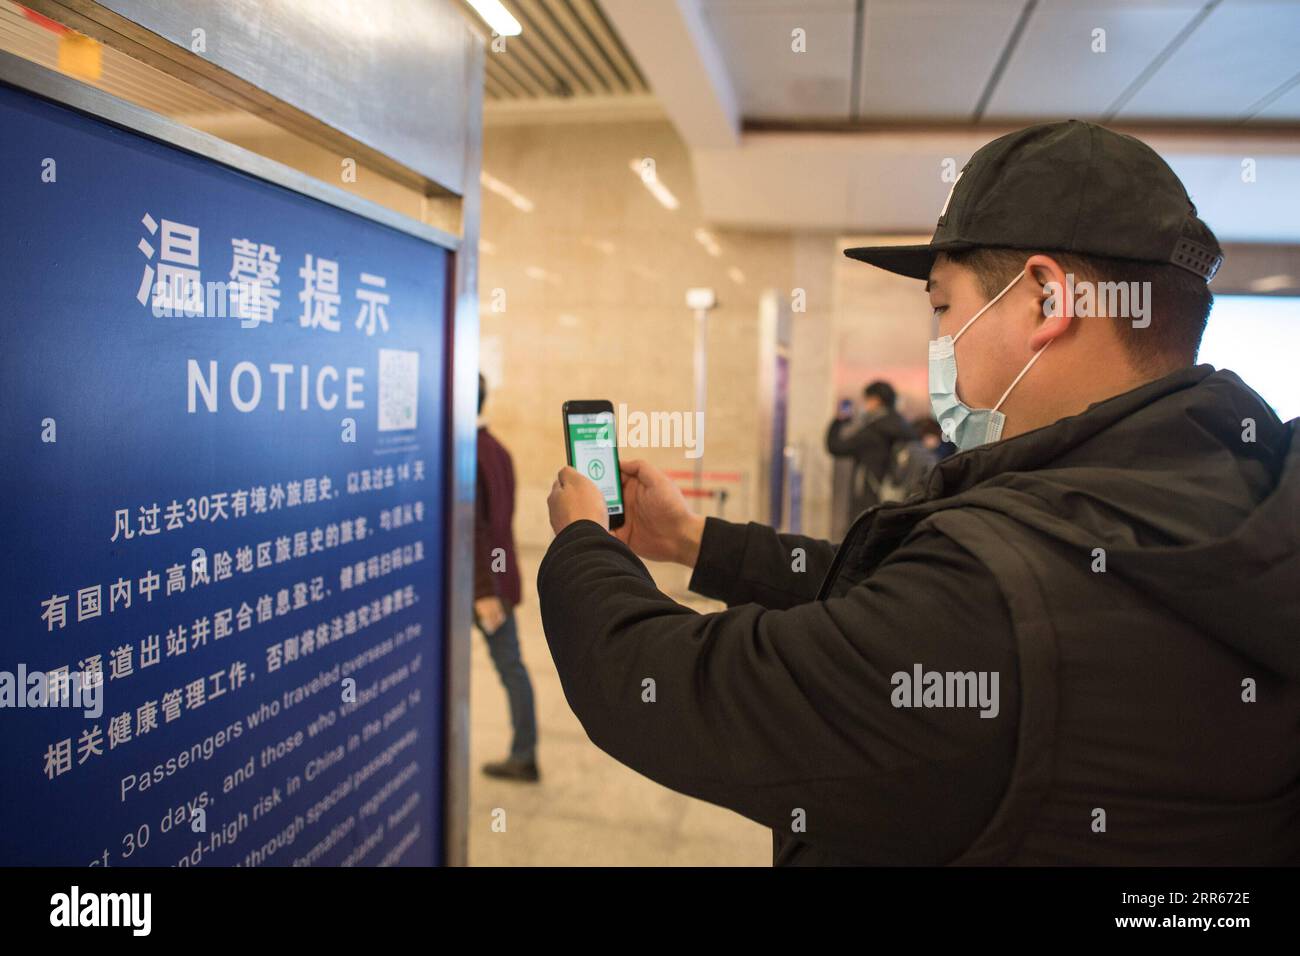 210128 -- SHANGHAI, Jan. 28, 2021 -- Gao Li scans the health QR code as he leaves Hankou Railway Station in Wuhan, central China s Hubei Province, Jan. 28, 2021. On the first day of the Spring Festival travel rush in 2021, Gao Li, a post-90s migrant worker in Shanghai, packed up his luggage and set foot on his way back to his hometown of Huangpi, Wuhan of central China for the Spring Festival. Before checking in, he fumbled for the negative nucleic acid testing report in his bag. Nothing could be more important than this piece of luggage . Two days ago, Shanghai medical workers came to Gao Li Stock Photo